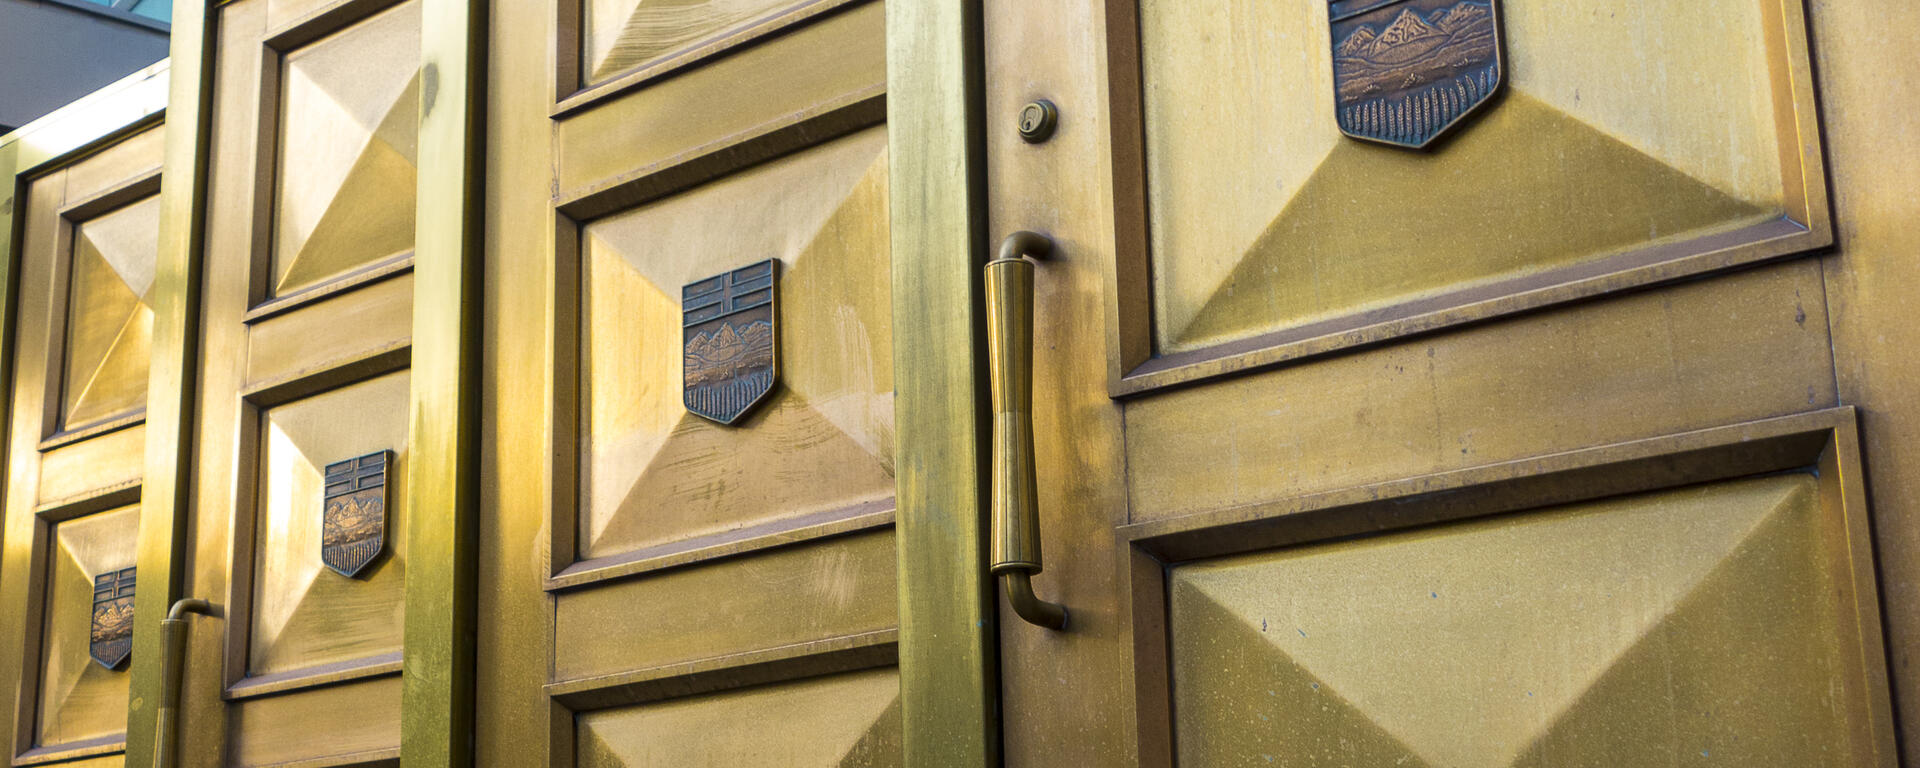 The historic gold doors outside the Calgary Court Centre